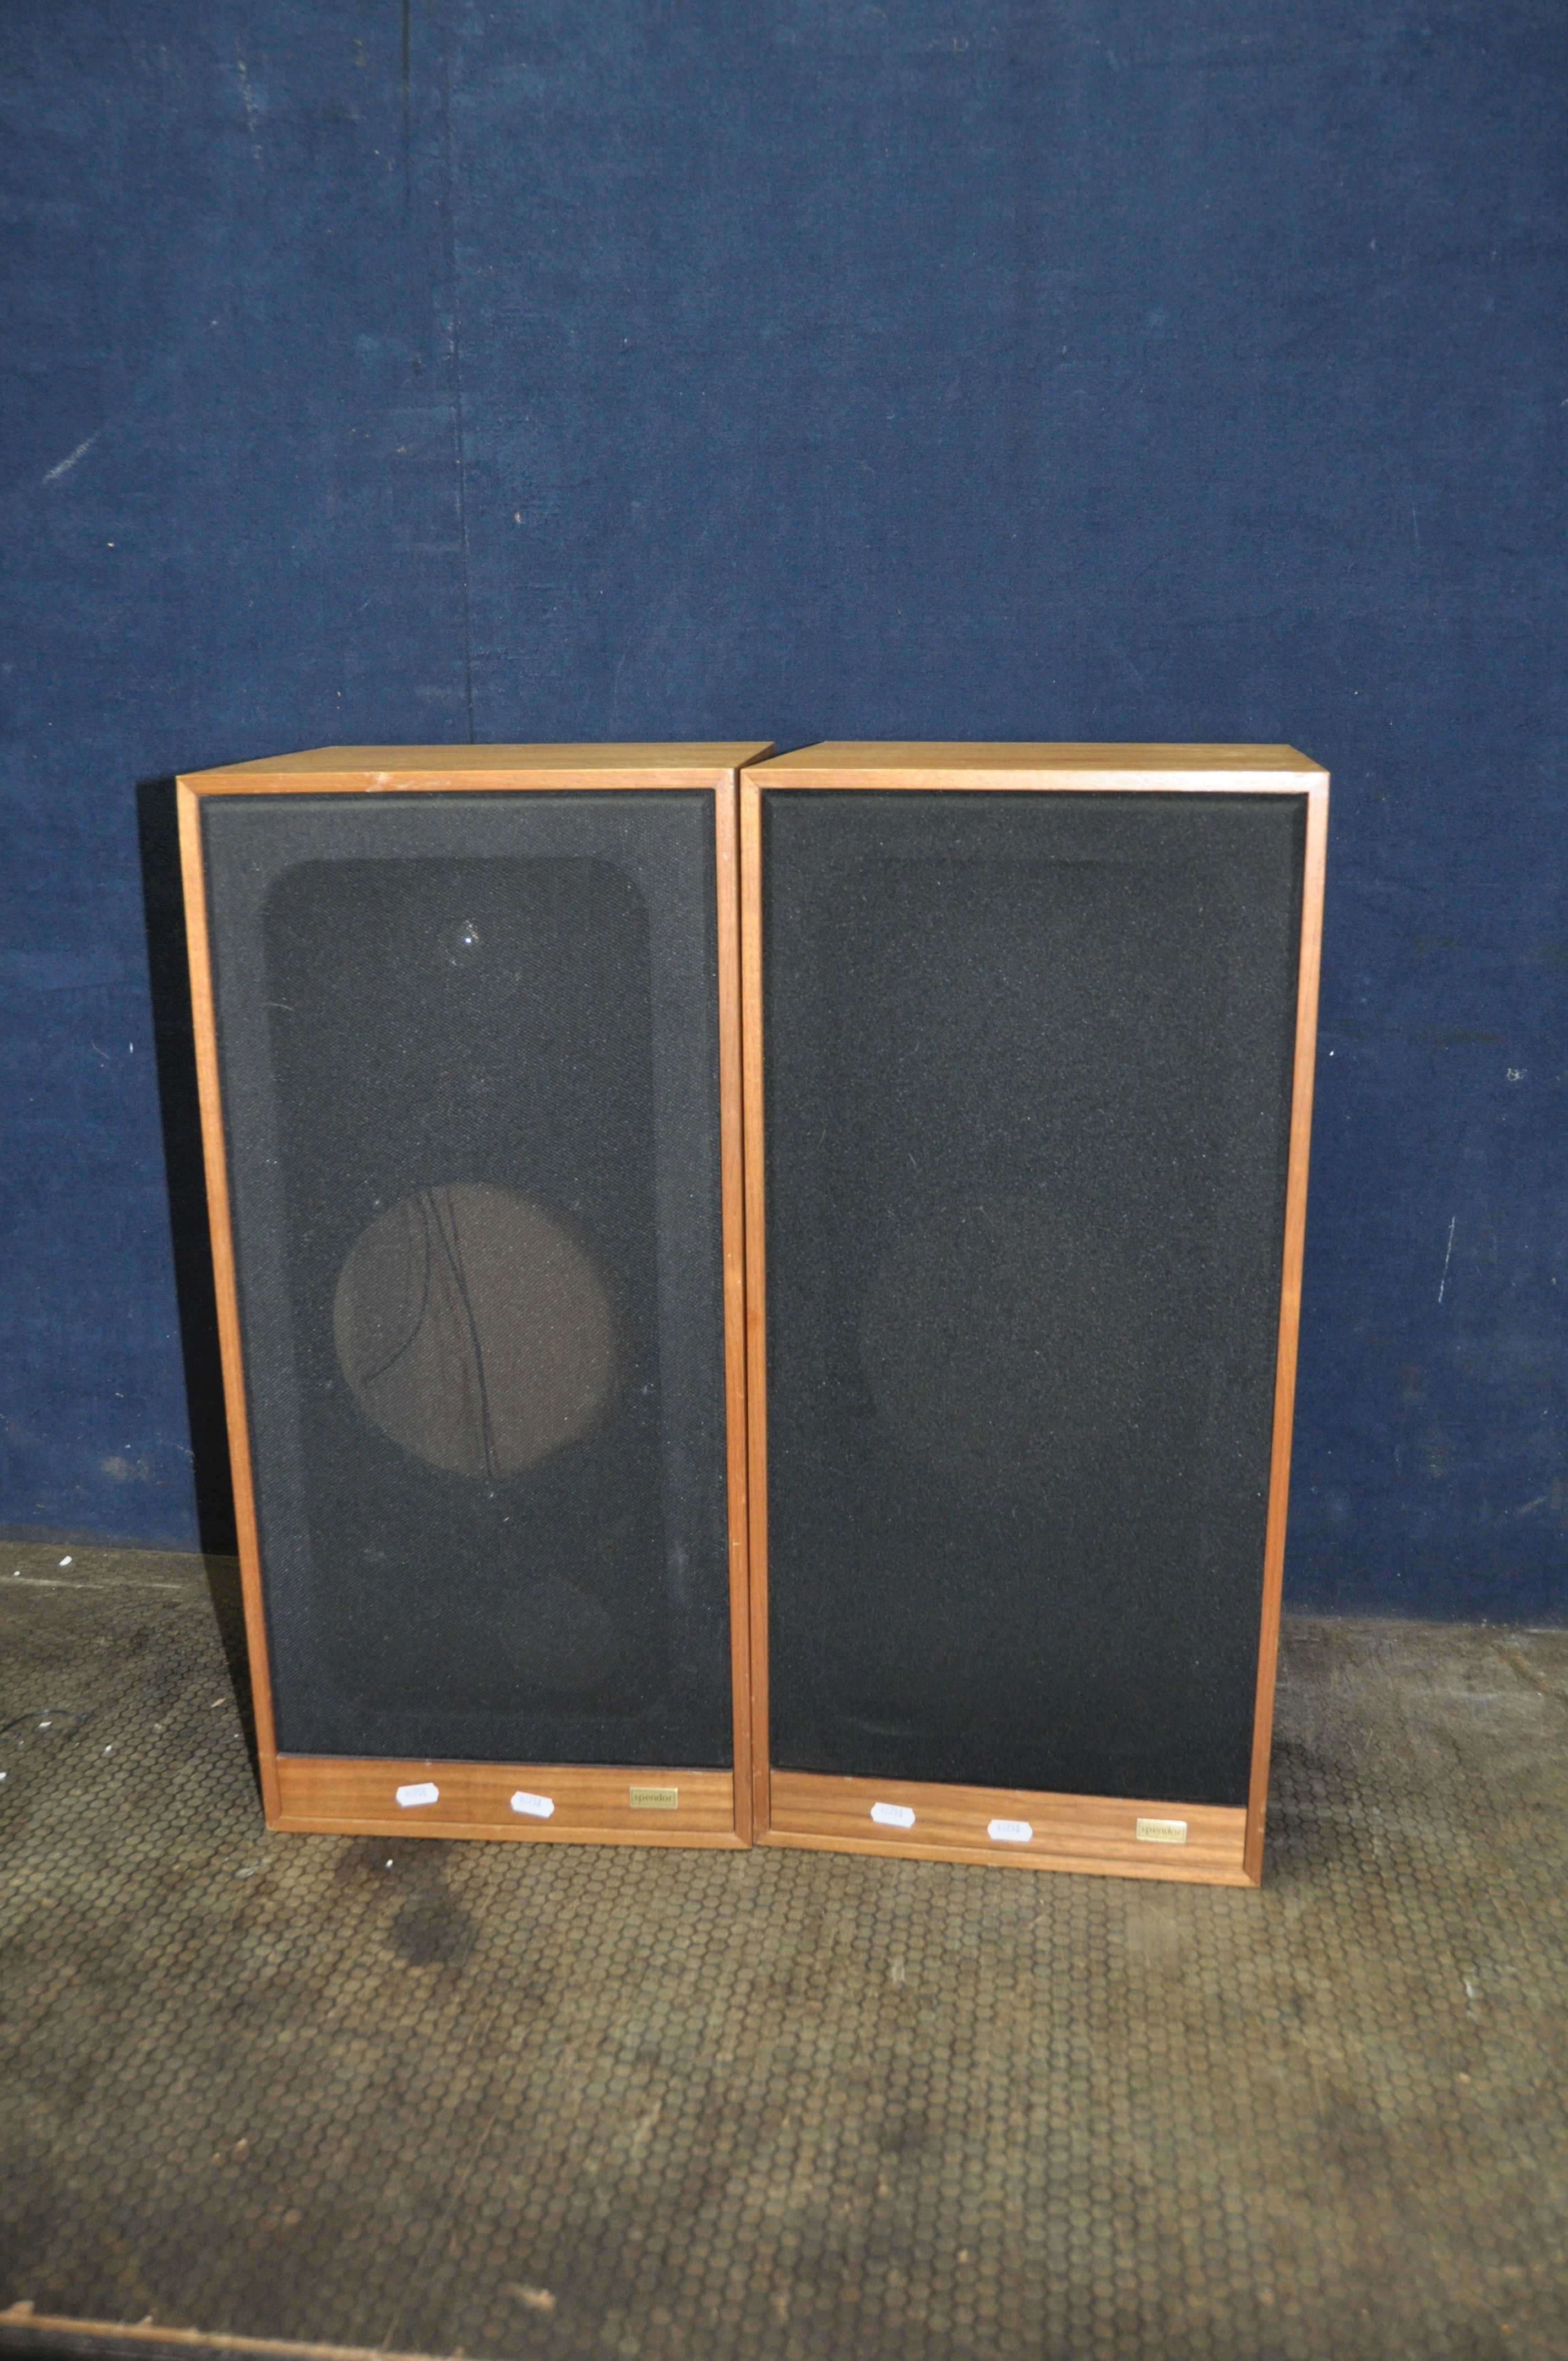 A PAIR OF SPENDOR SP1 VINTAGE HI FI SPEAKER CABINETS with two horns fitted but no 8in drivers in - Image 3 of 6